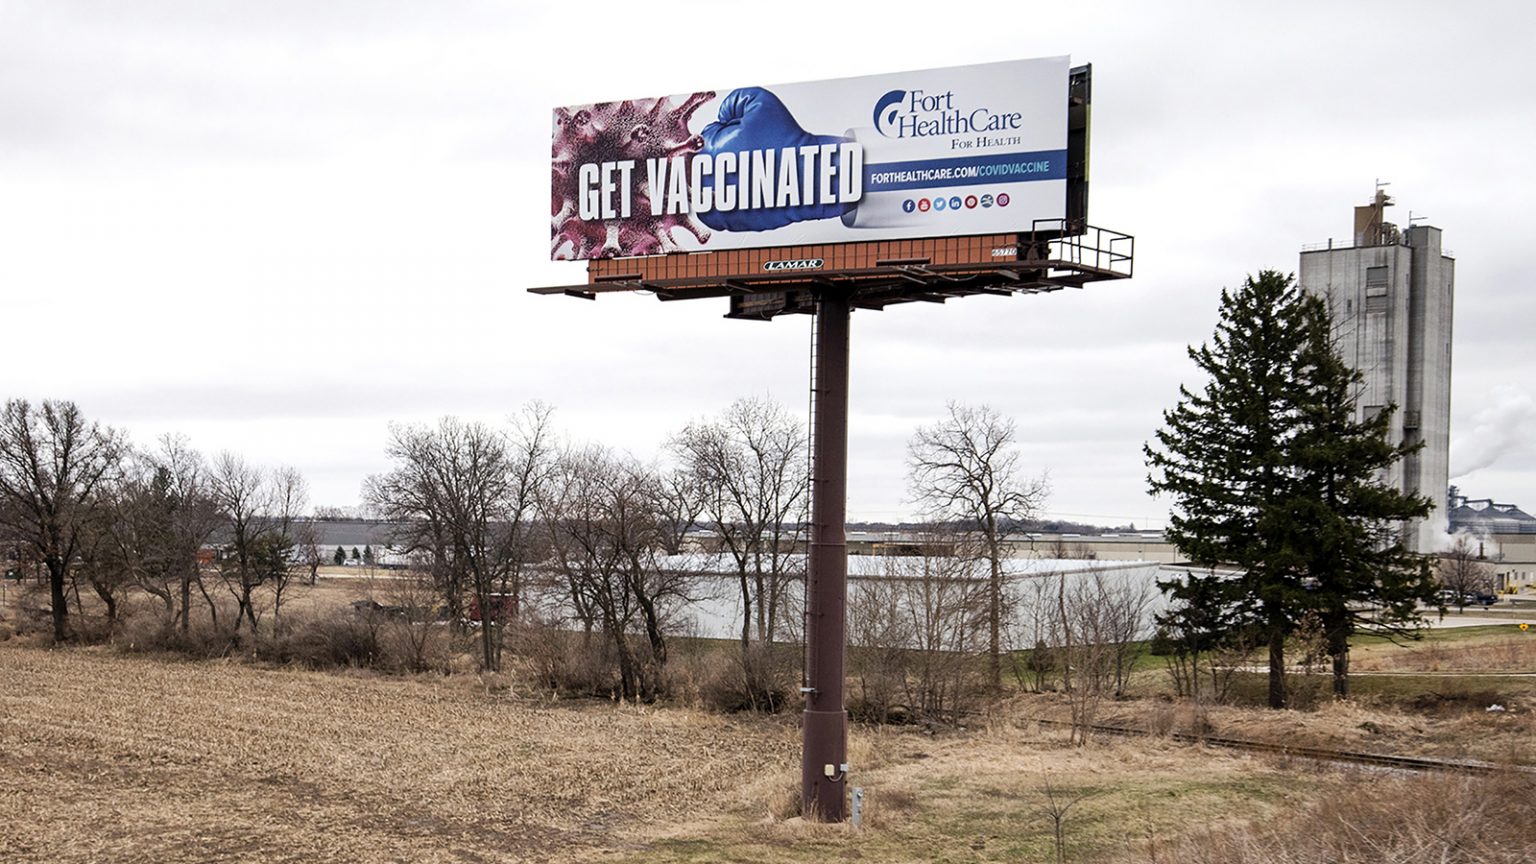 A billboard reading Get Vaccinated showing a boxing glove punching a coronavirus viroid illustration is surrounded by farm fields and warehouses.